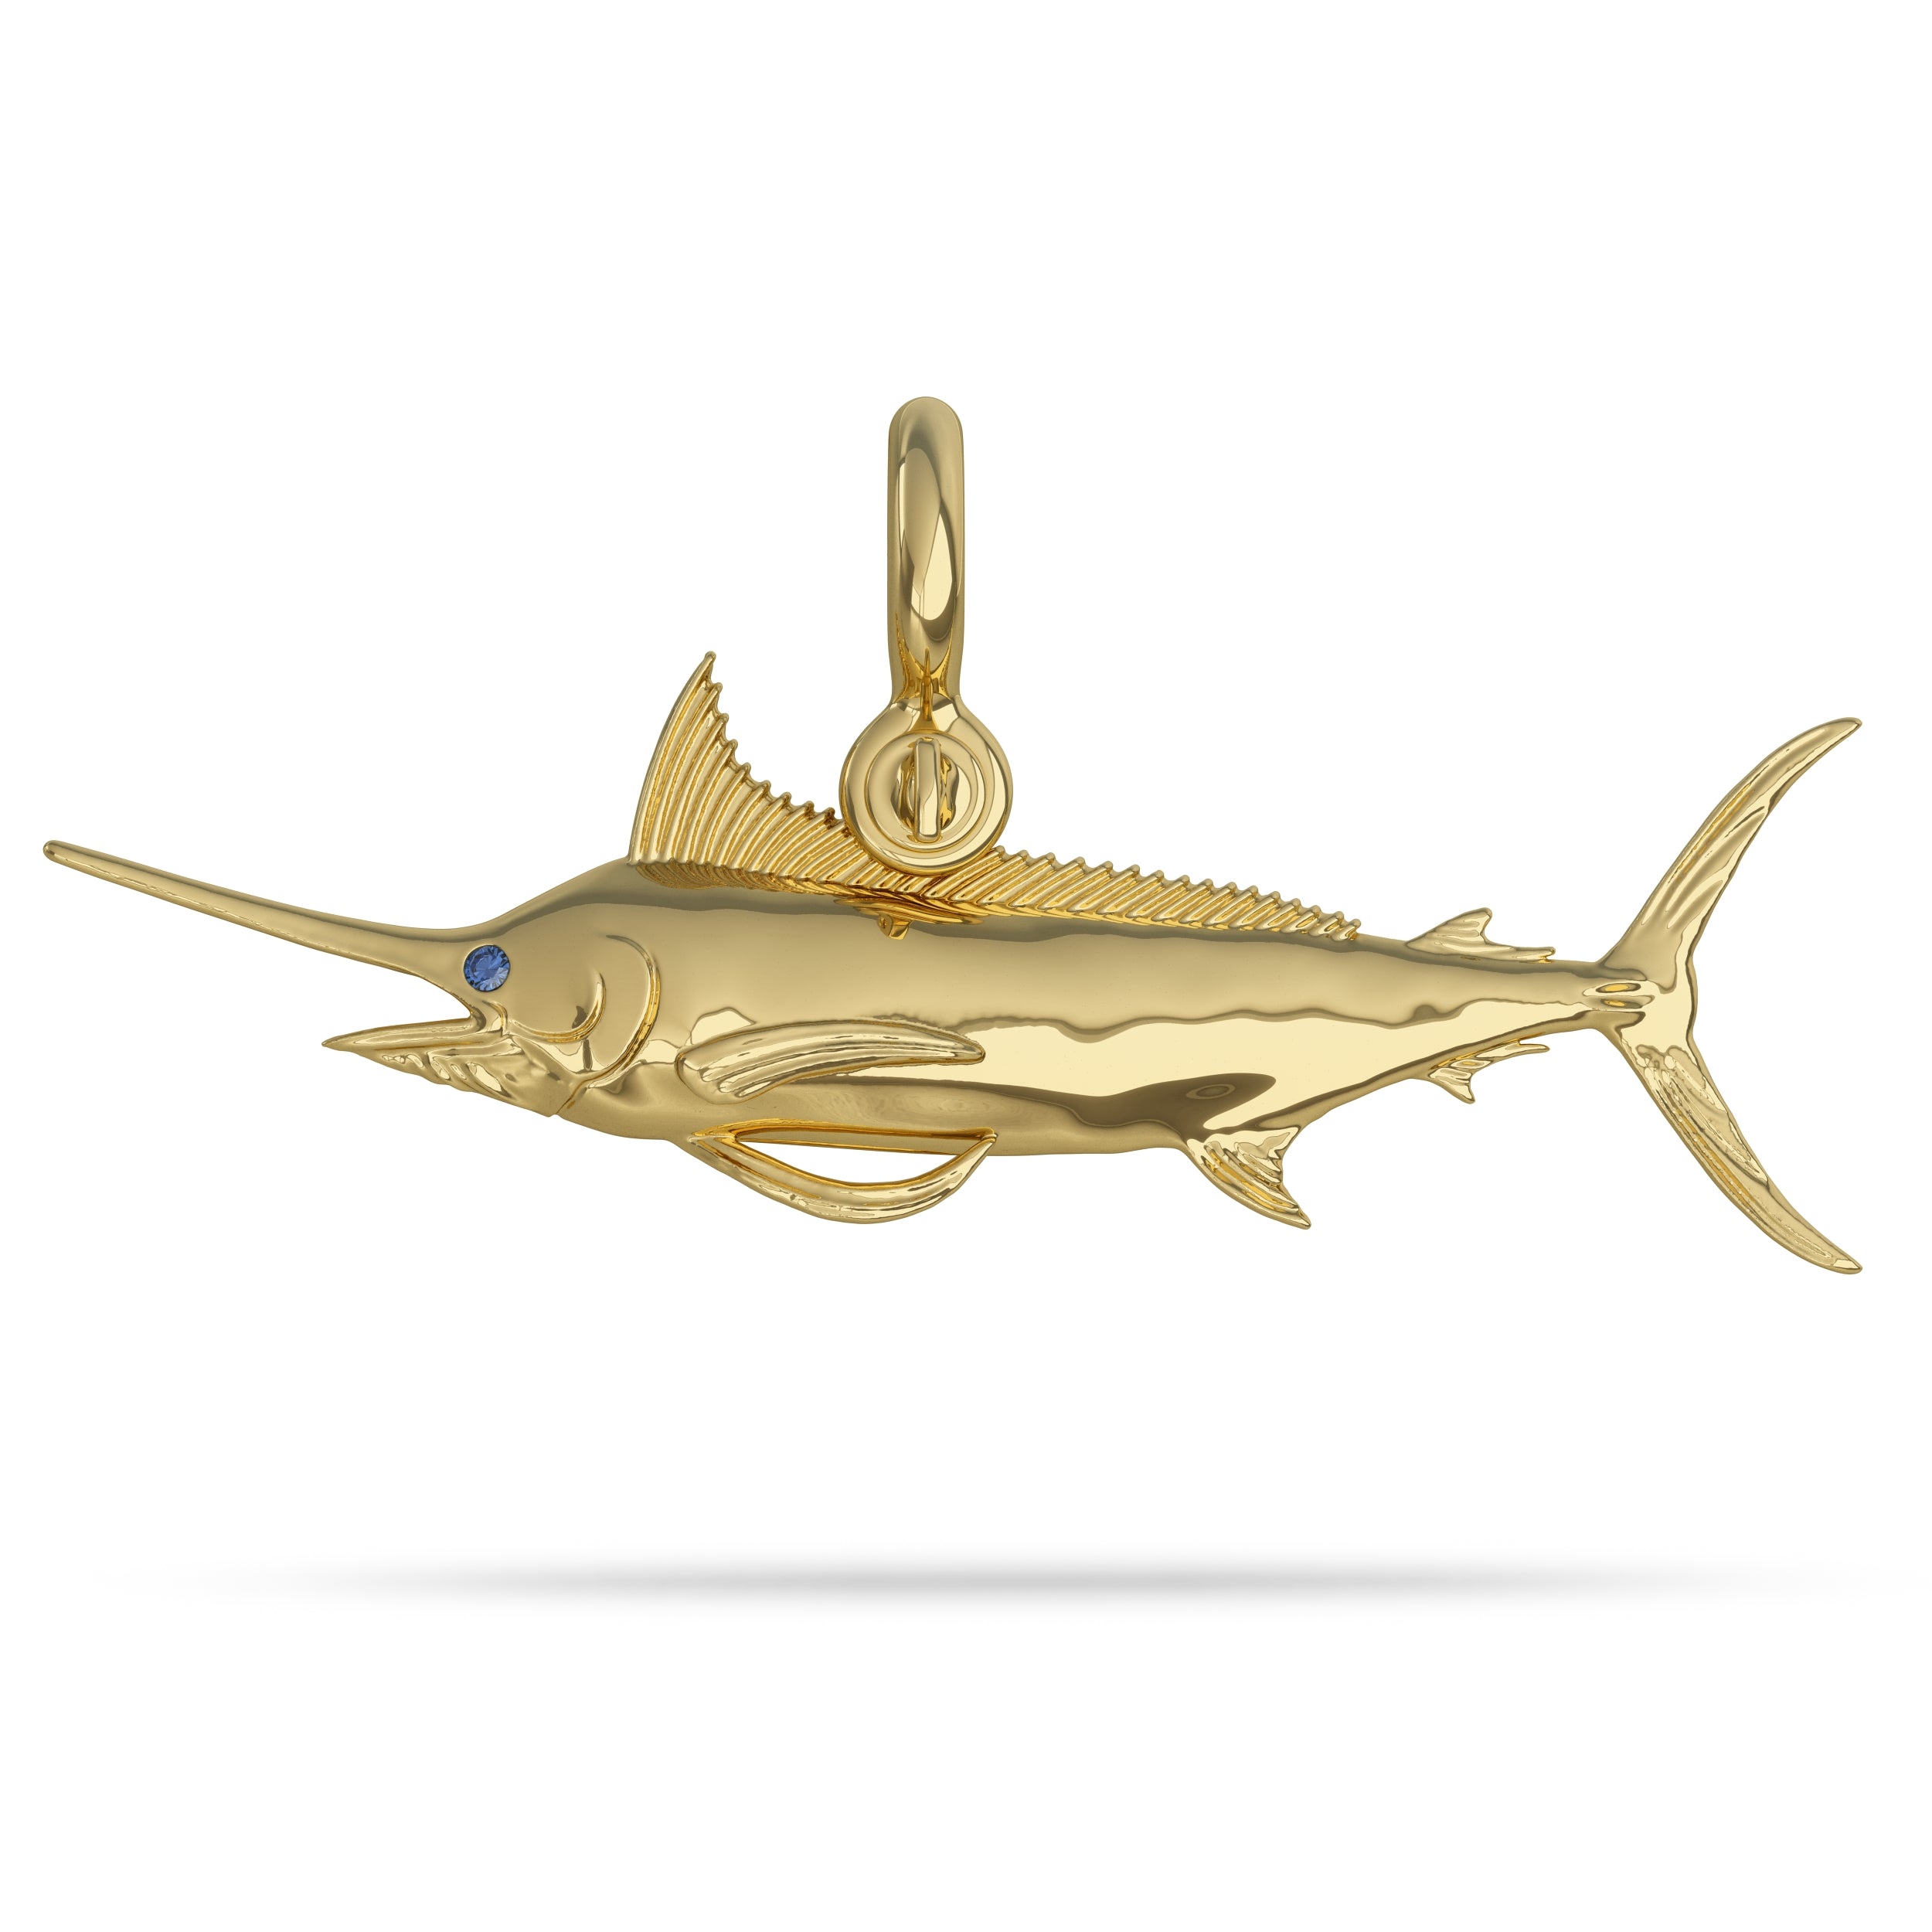 Solid 14k Gold Blue Marlin Jewelry Pendant High Polished Mirror Finish With Blue Sapphire Eye with A Mariner Shackle Bail Custom Designed By Nautical Treasure Jewelry In The Florida Keys Open From Hemingway Book Old Man and the Sea